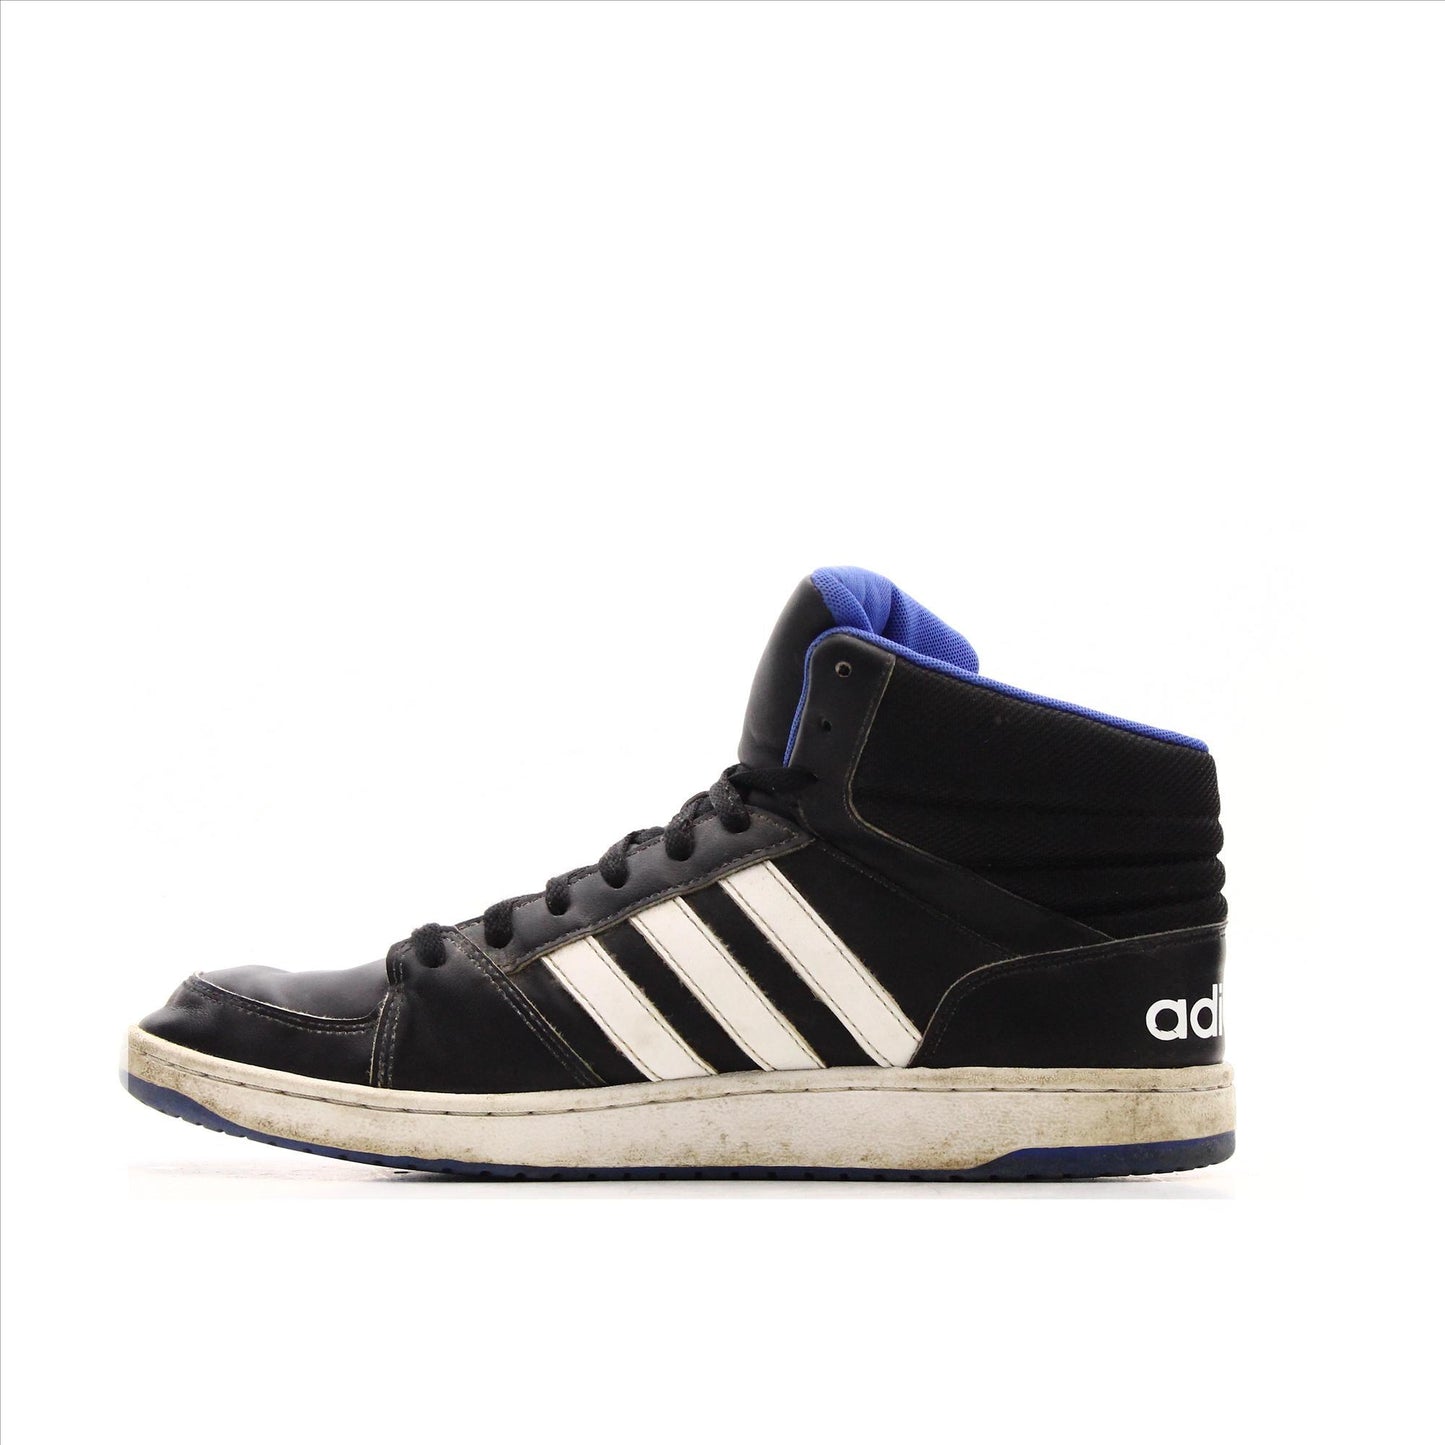 Adidas Neo Label High-Top